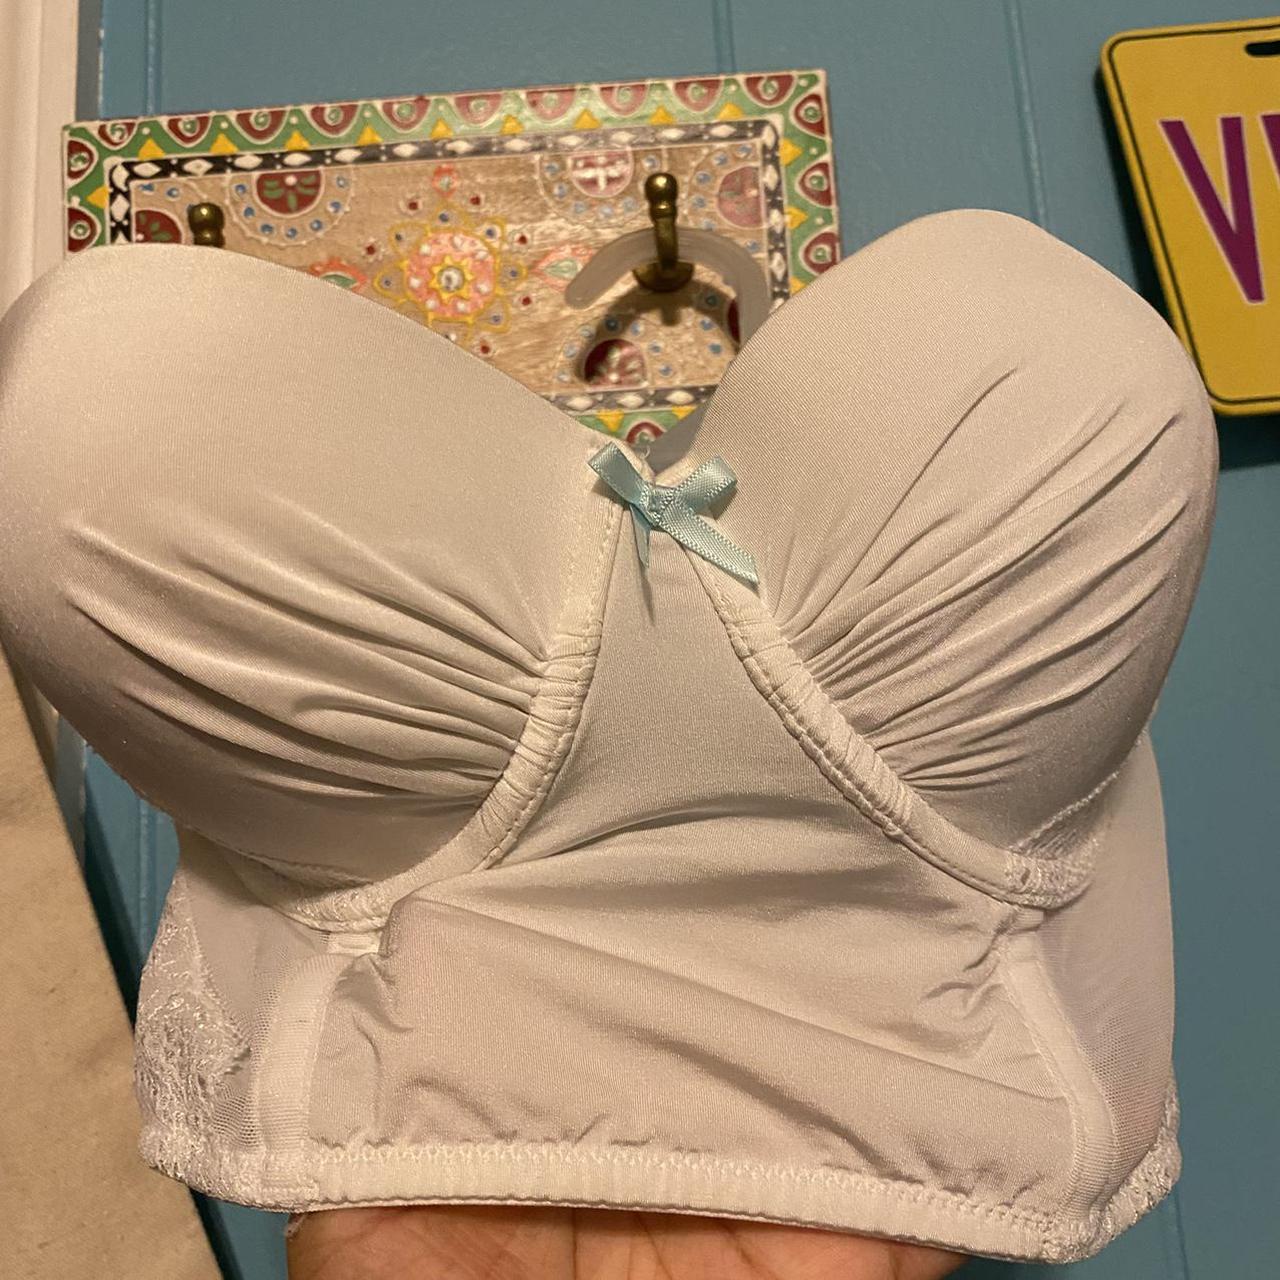 Strapless bra says size small. Im a size 34B and and - Depop